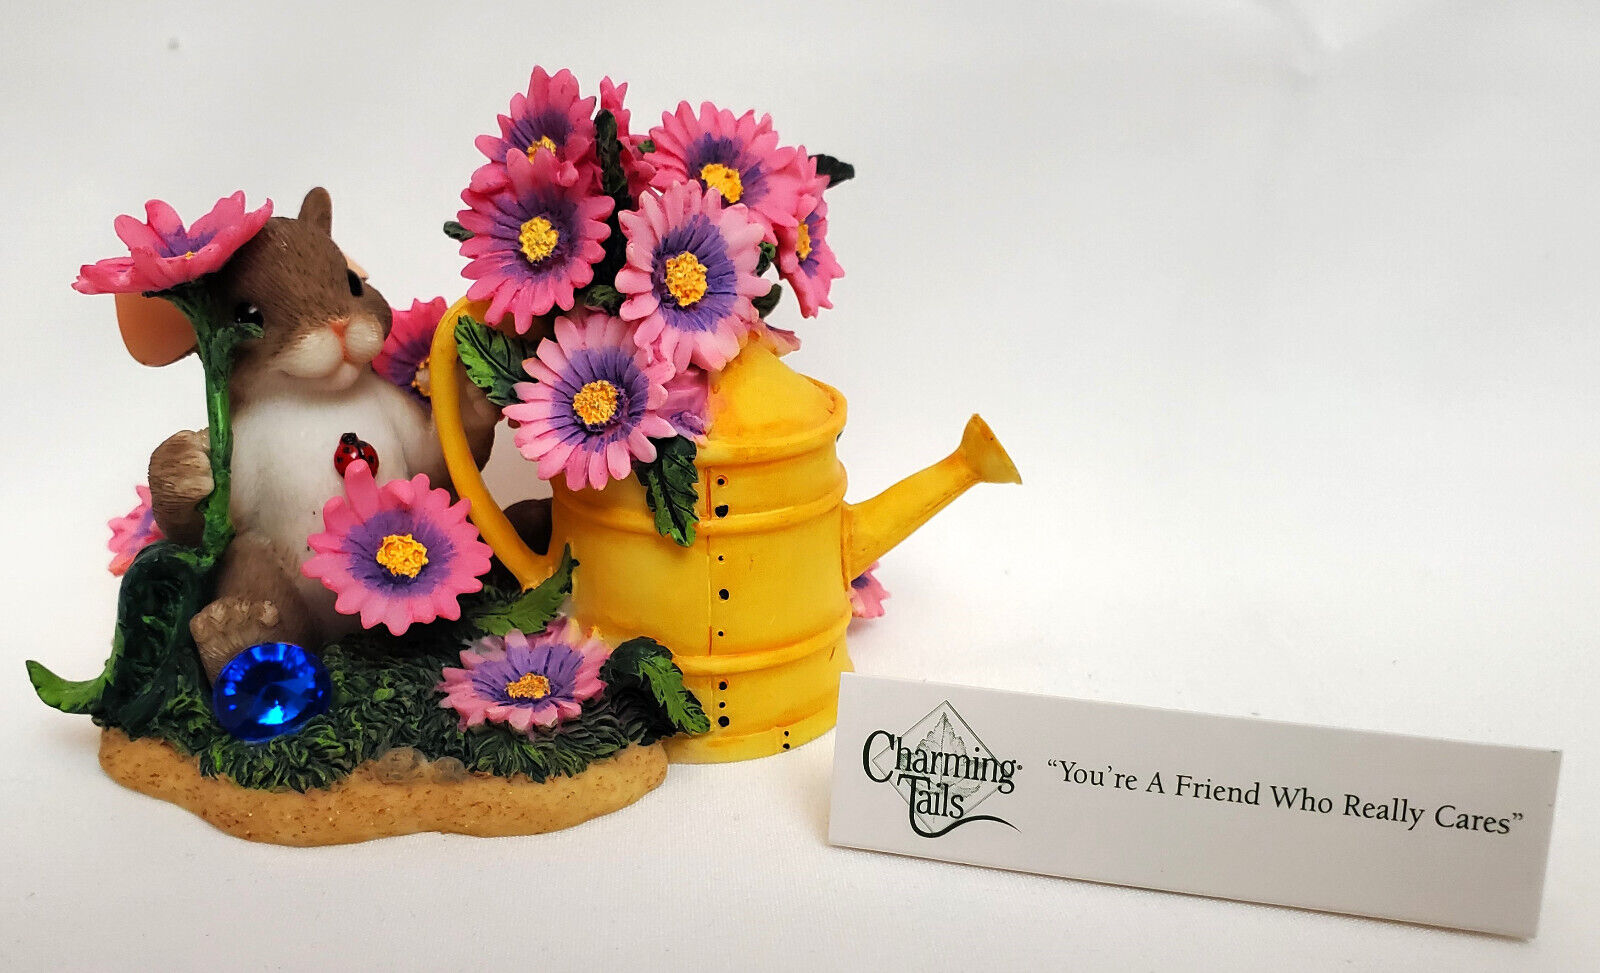  Charming Tails: You're A Friend Who Really Cares, 89/228 - Pristine Condition